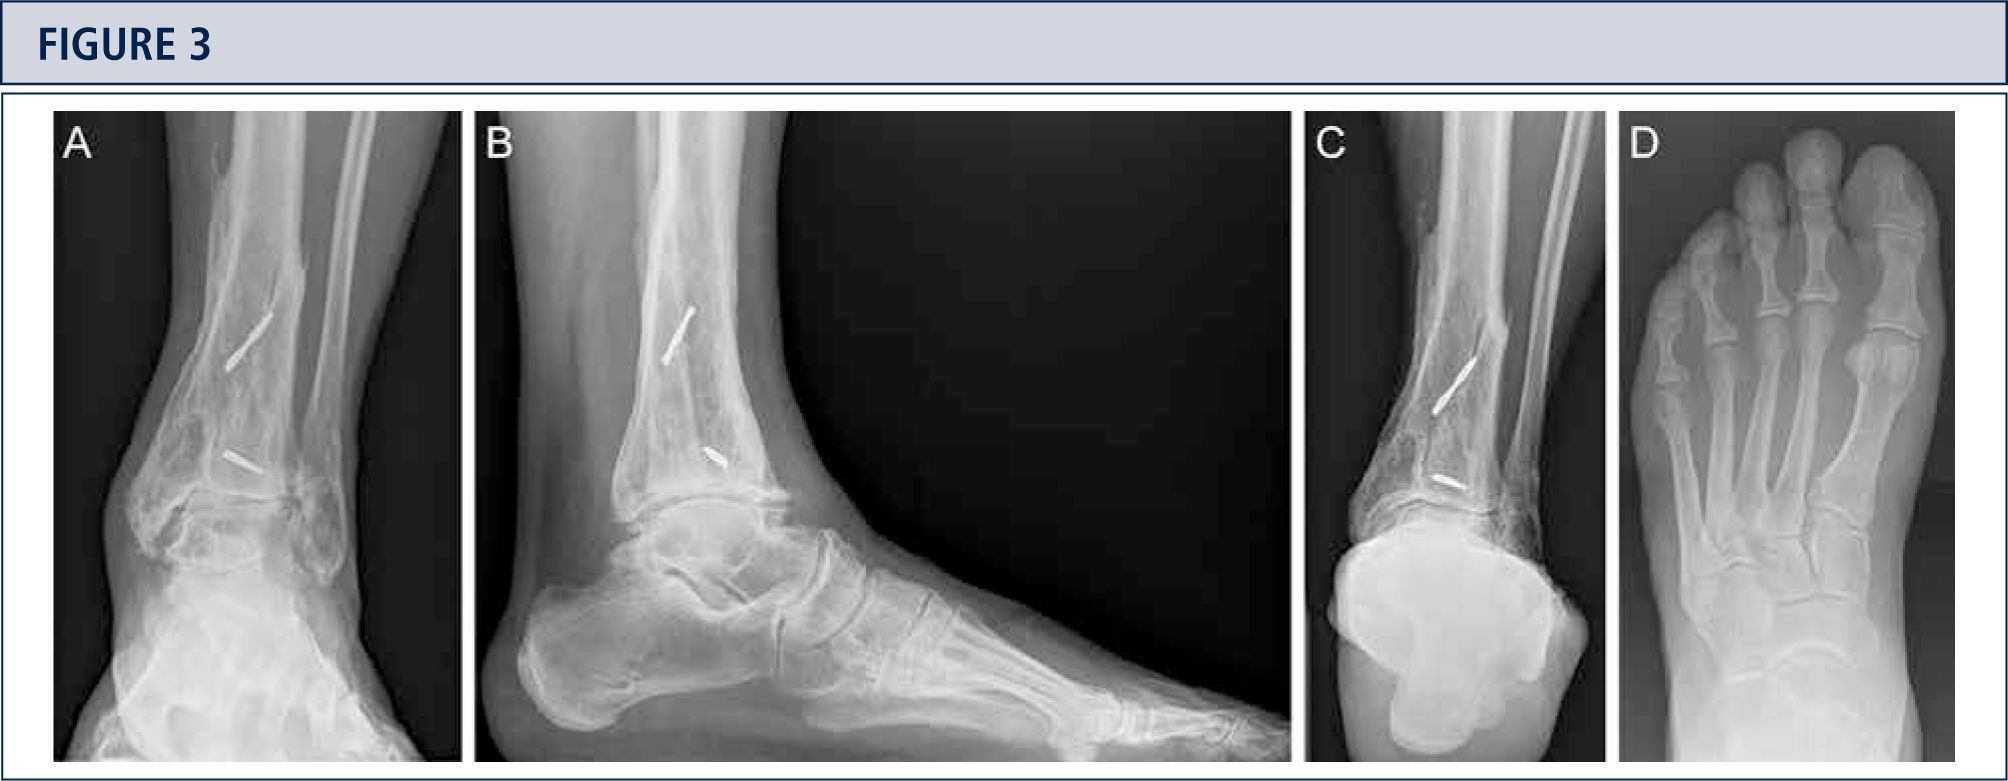 Xray Image Ankle Lateral View Show Stock Photo 272065442 | Shutterstock